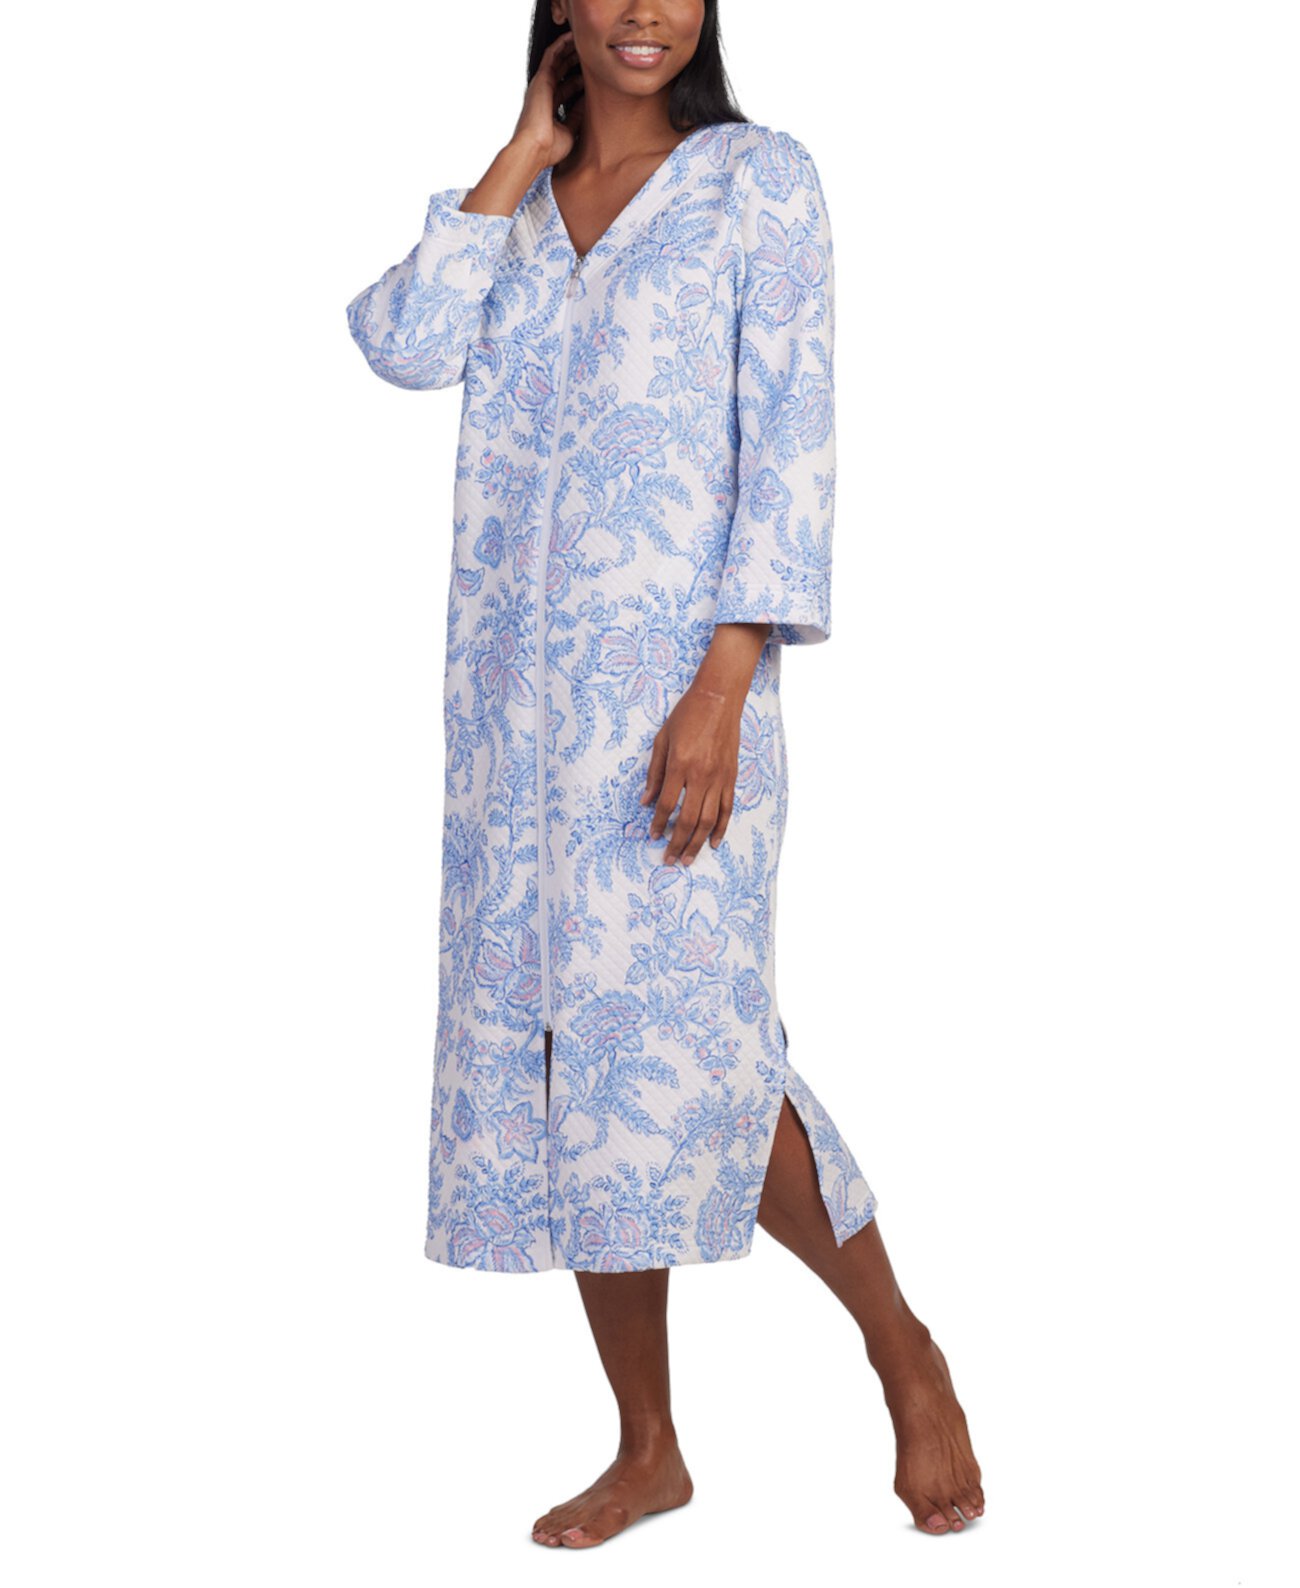 Women's Quilted Floral 3/4-Sleeve Robe Miss Elaine